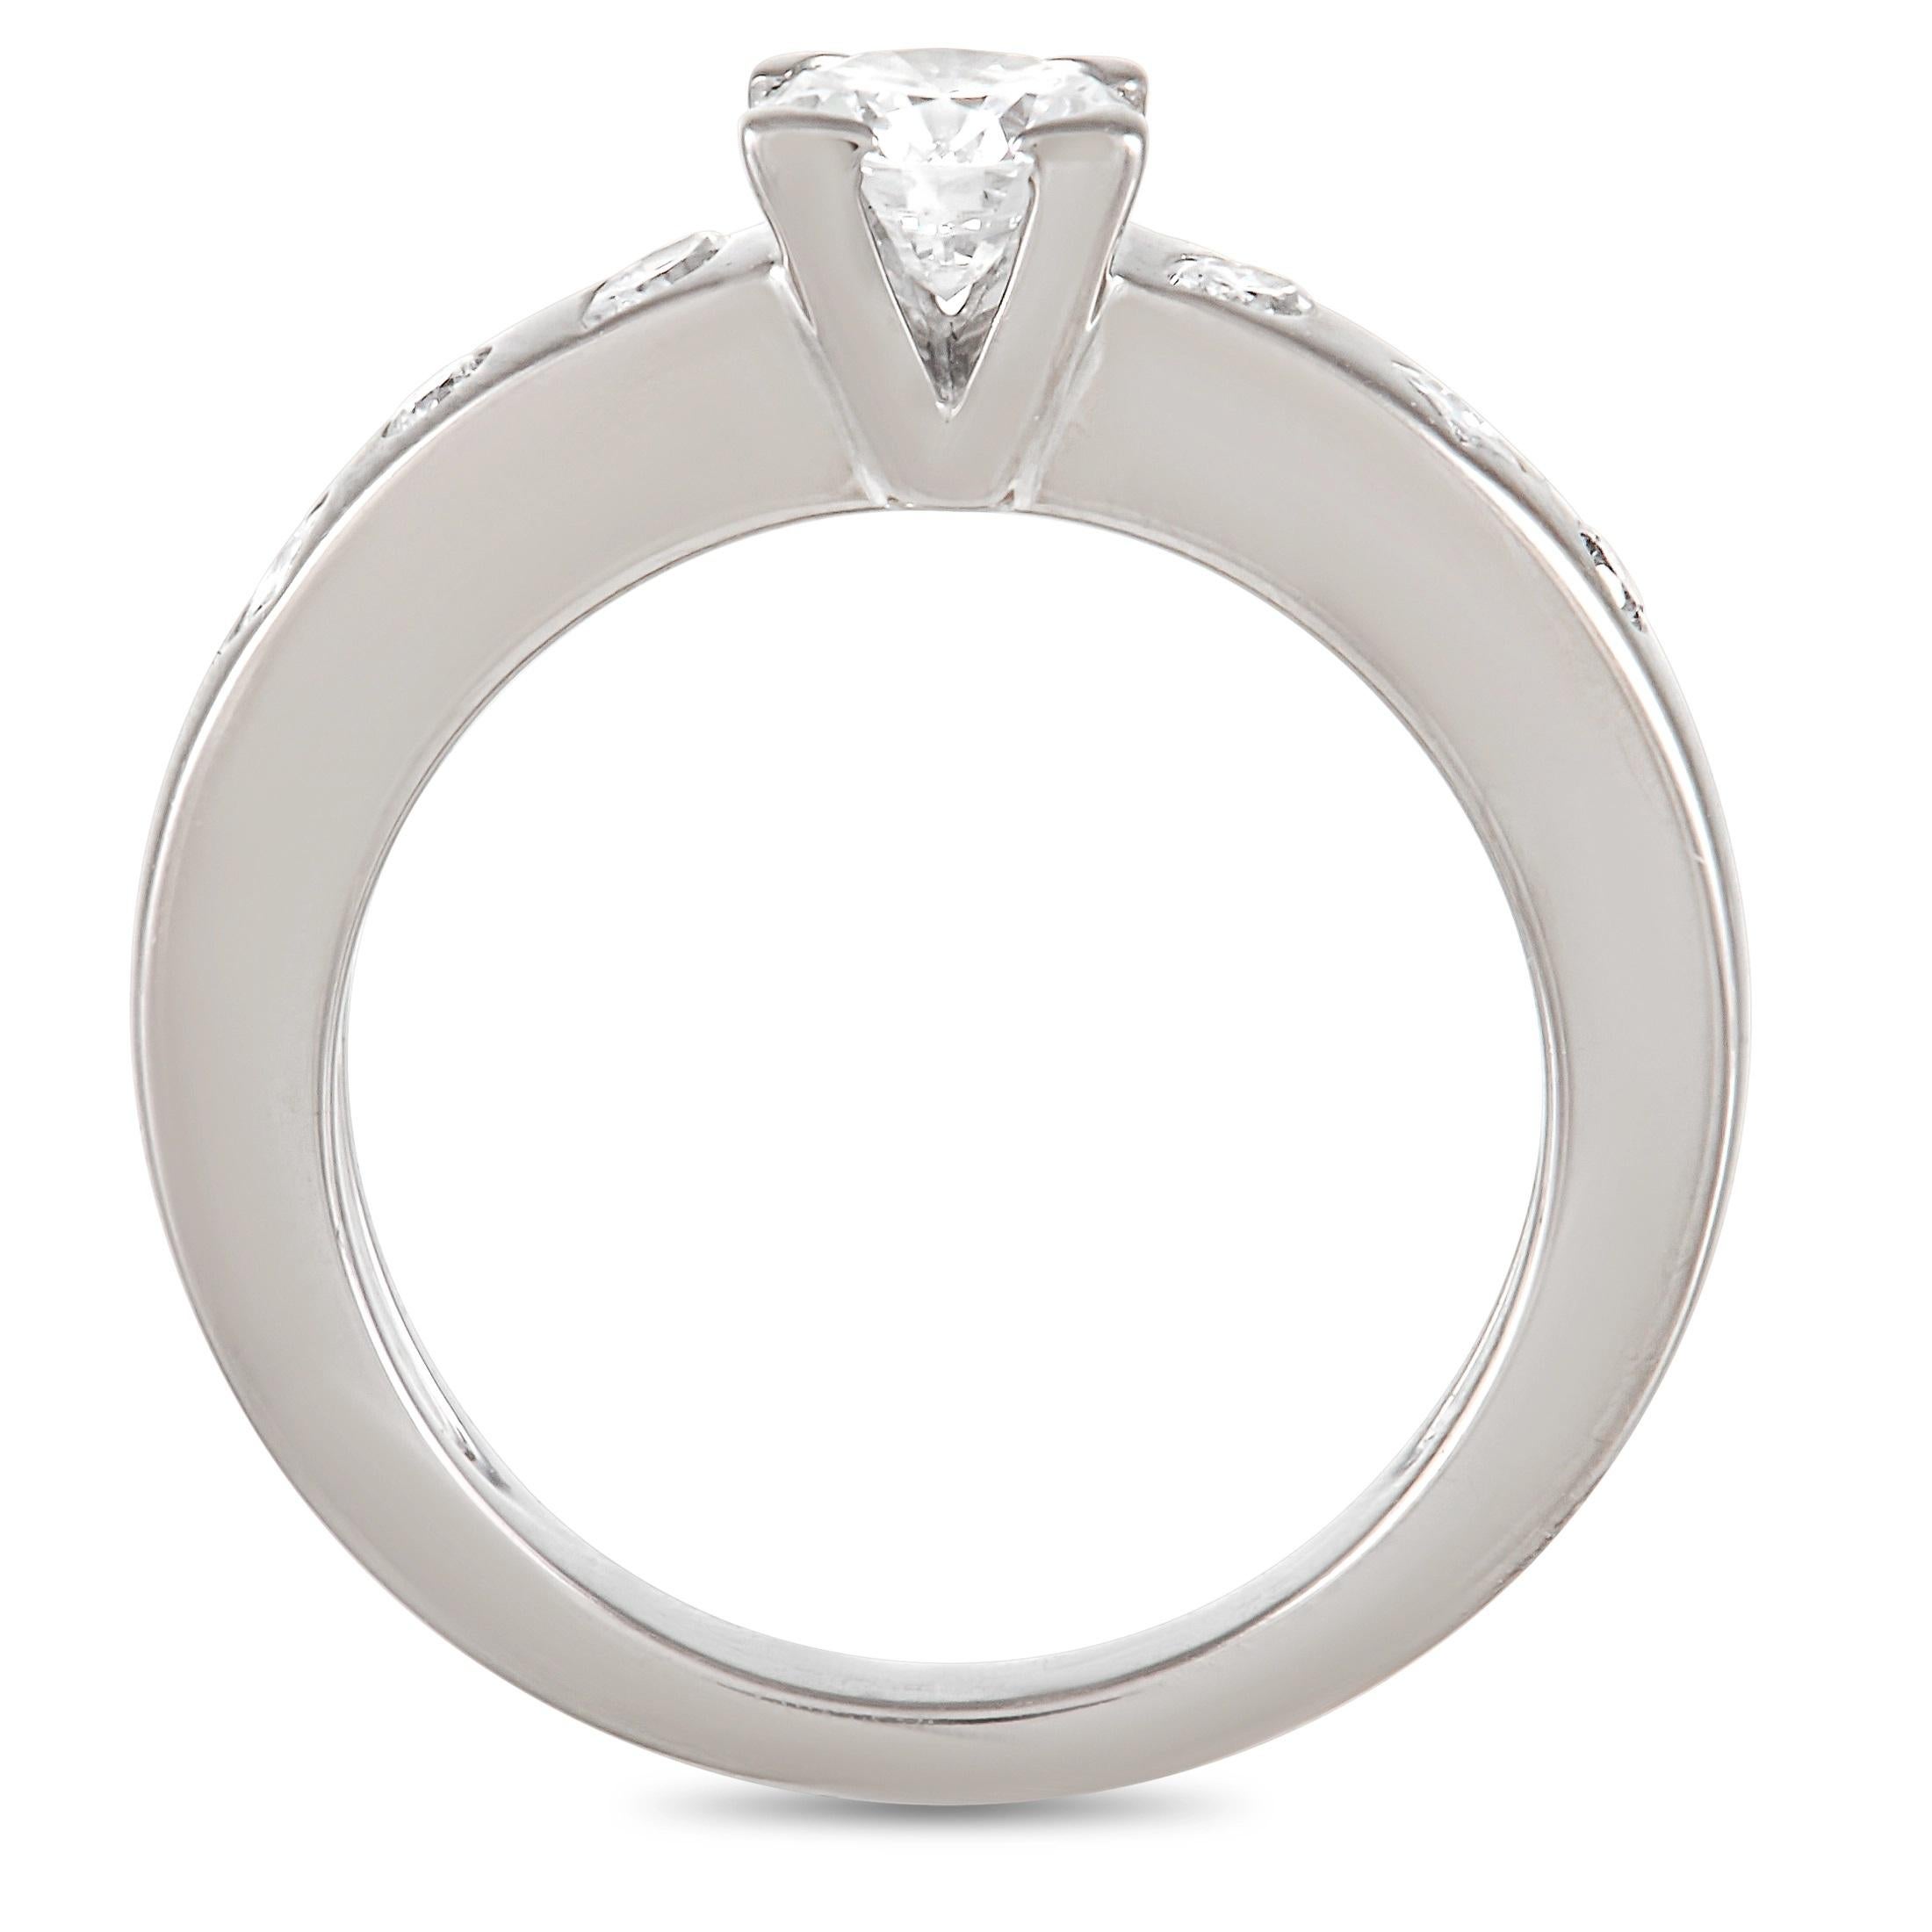 This scintillating Chanel ring exudes the brand’s signature sense of charm. This piece’s 18K White Gold setting - which features a 3mm wide band and a 5mm top height - provides the perfect backdrop for the breathtaking 0.56 carat diamond center